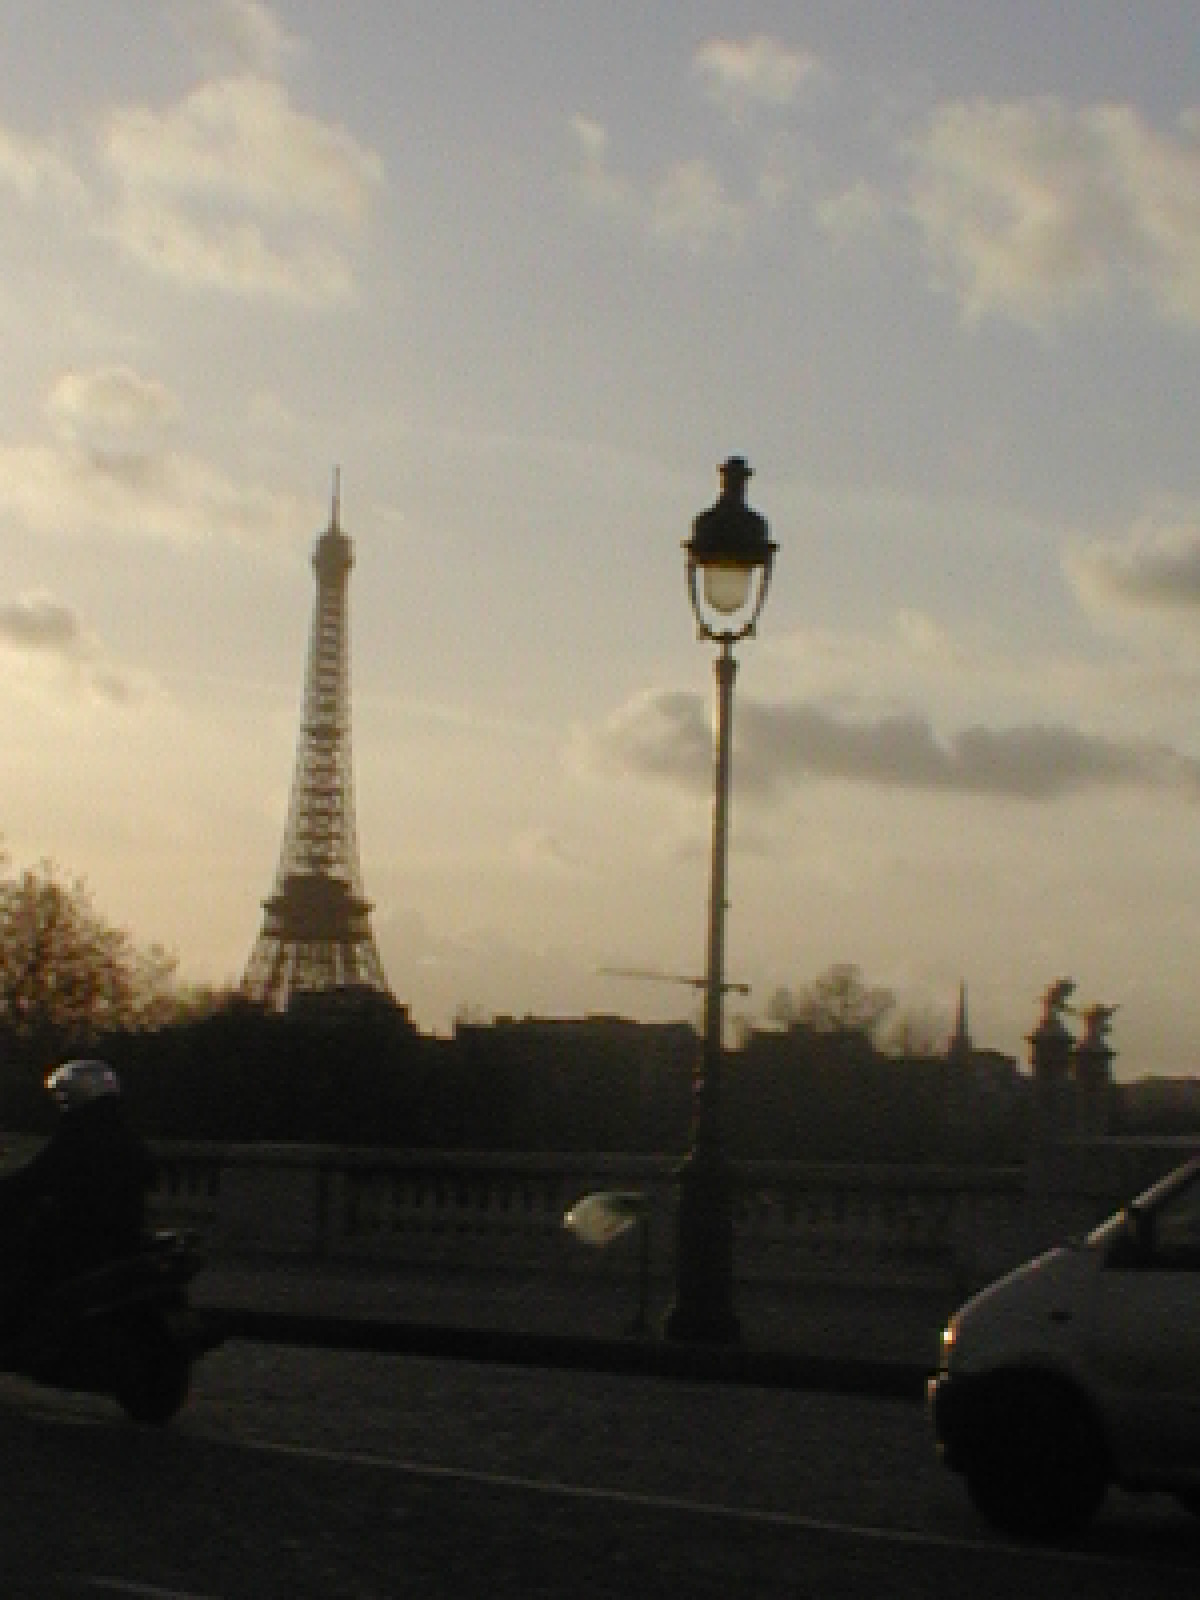 Eiffel Tower from distance